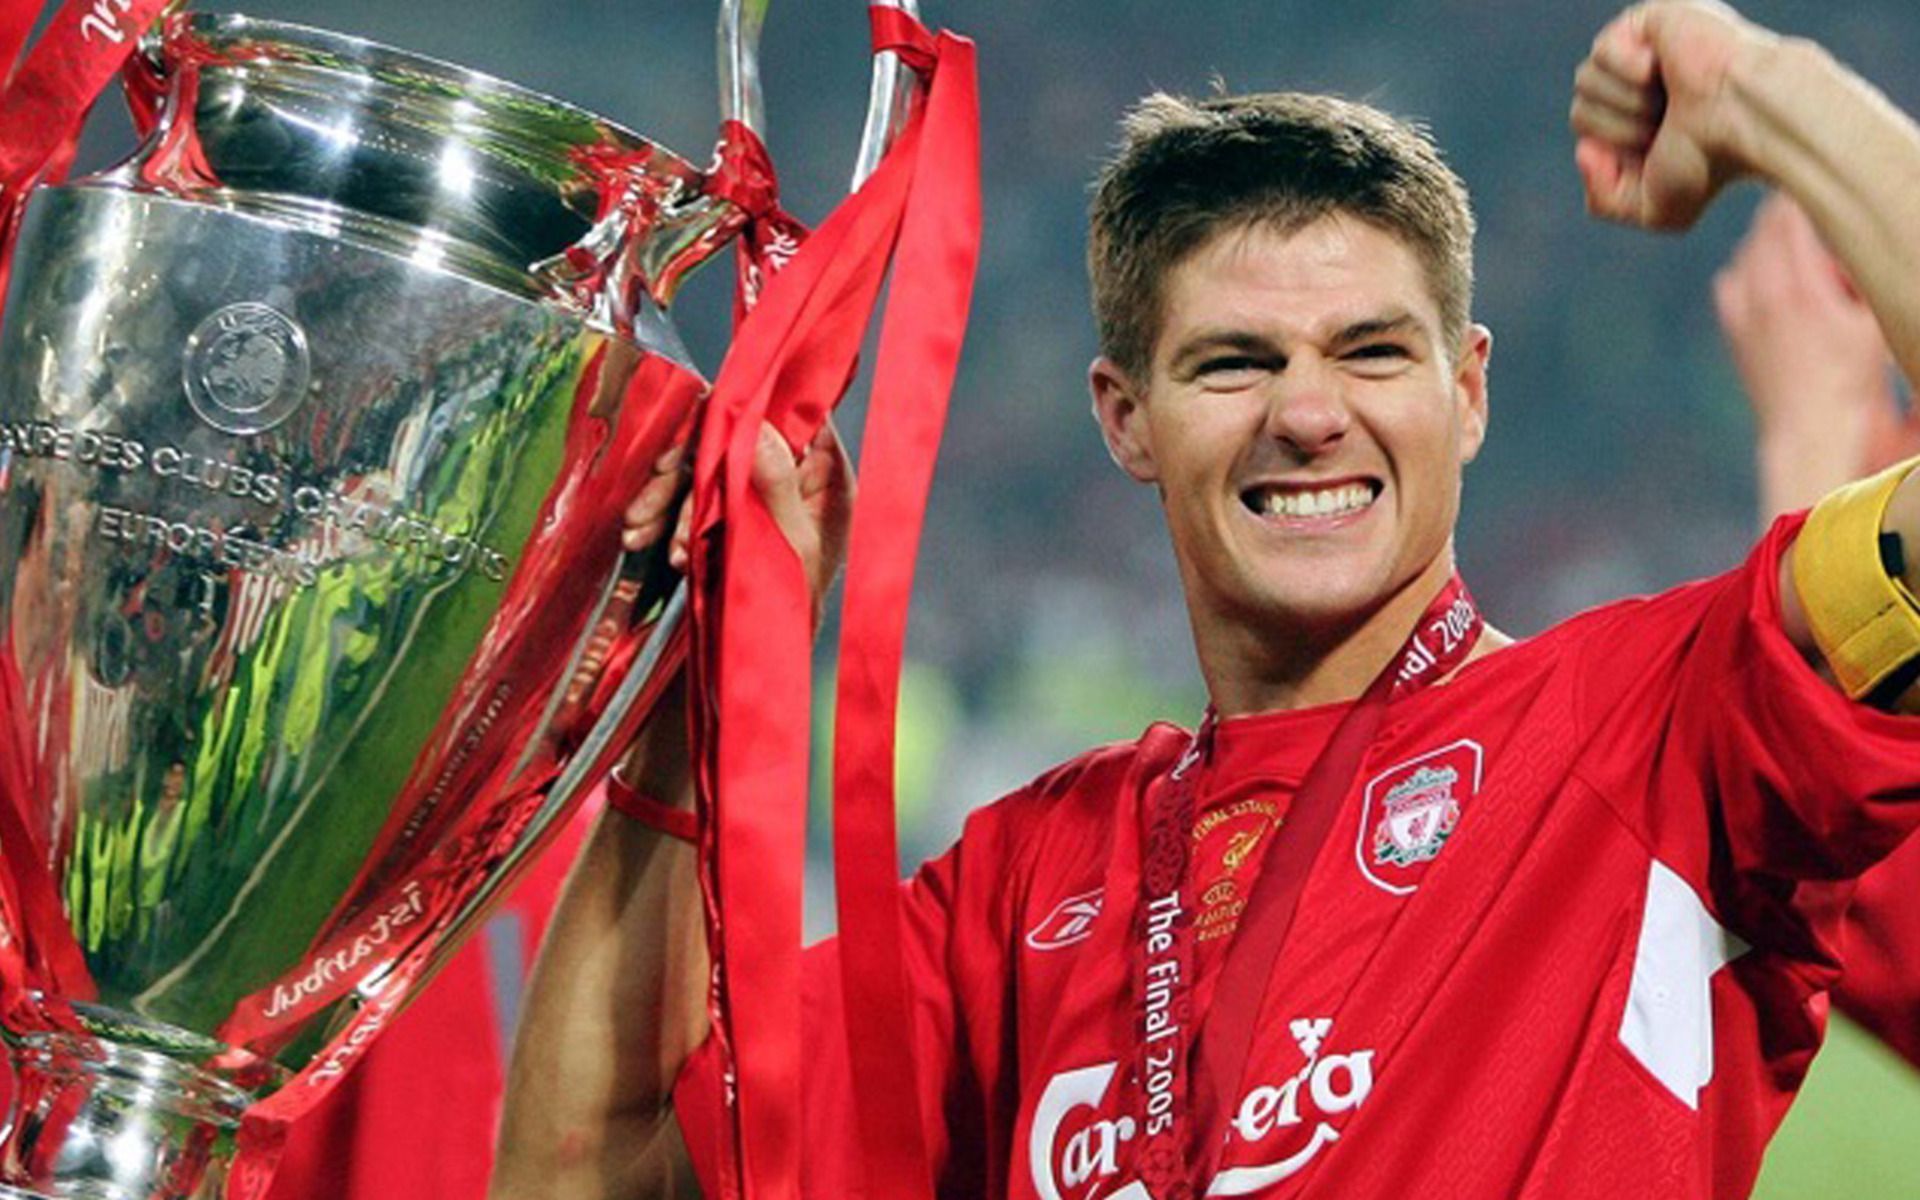 Steven Gerrard with the Champions League trophy.